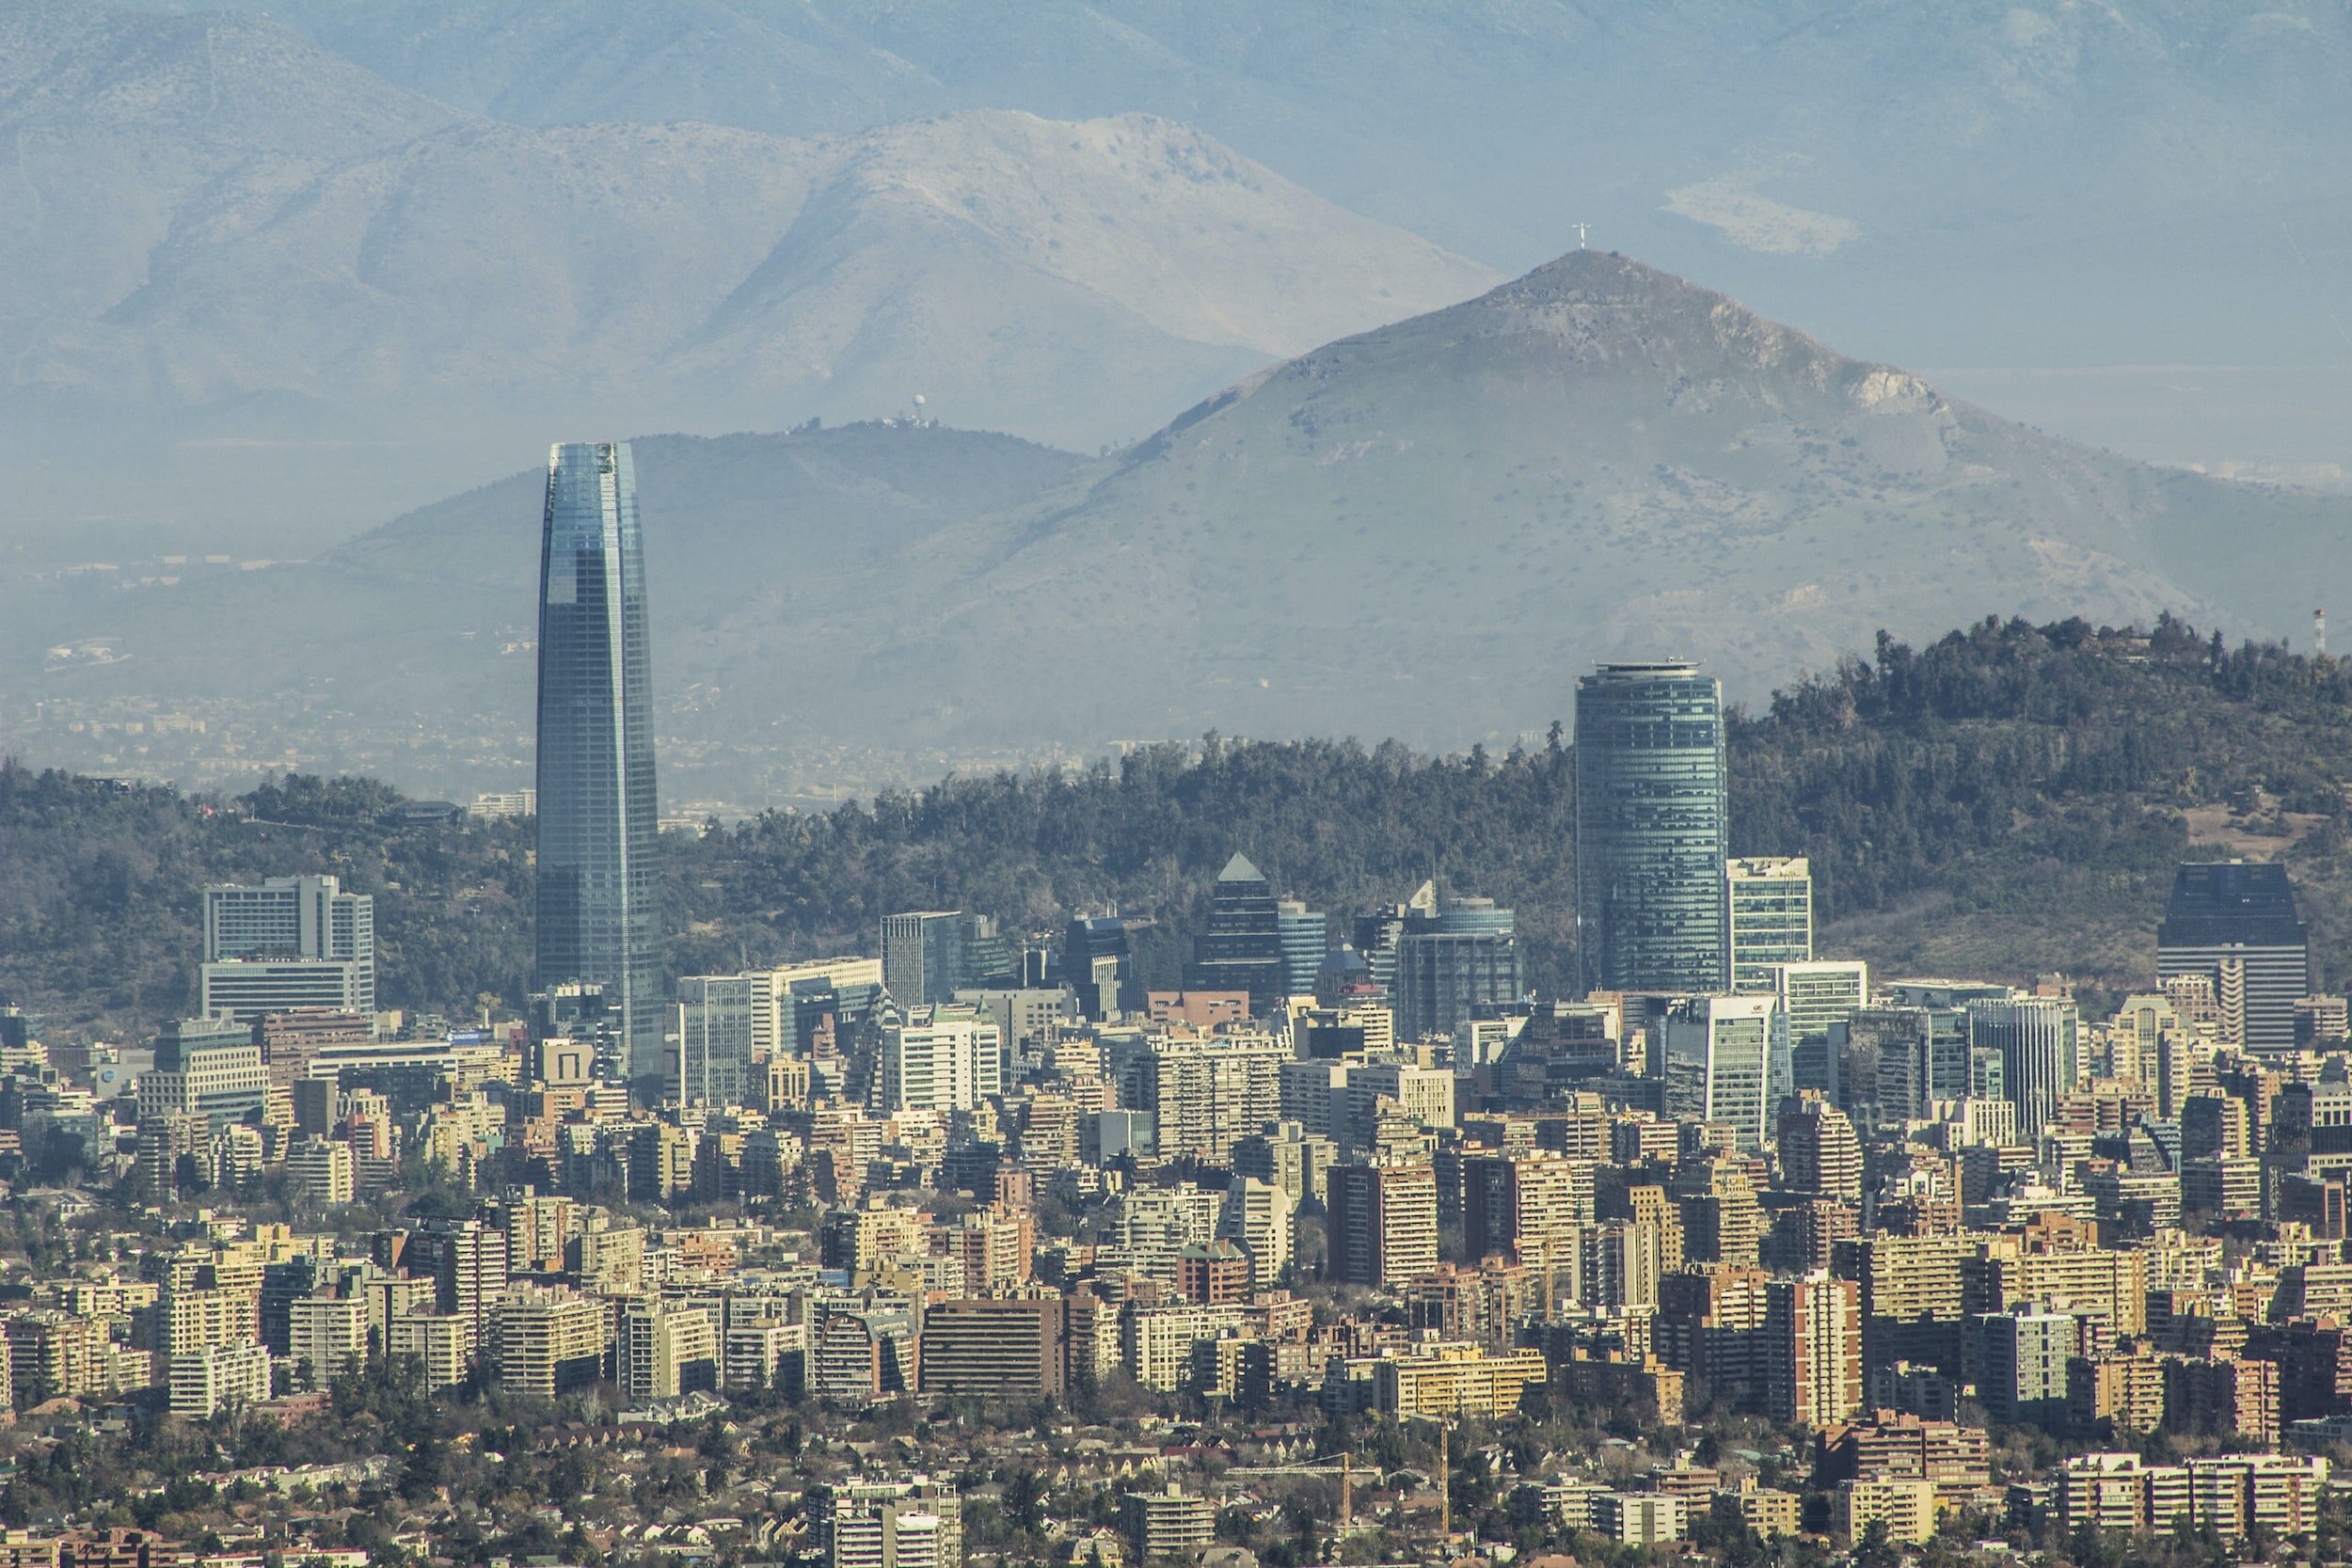 A view of Santiago's eastern districts, including Providencia and the Sky Costanera skyscraper, with the Andes mountains in the background.